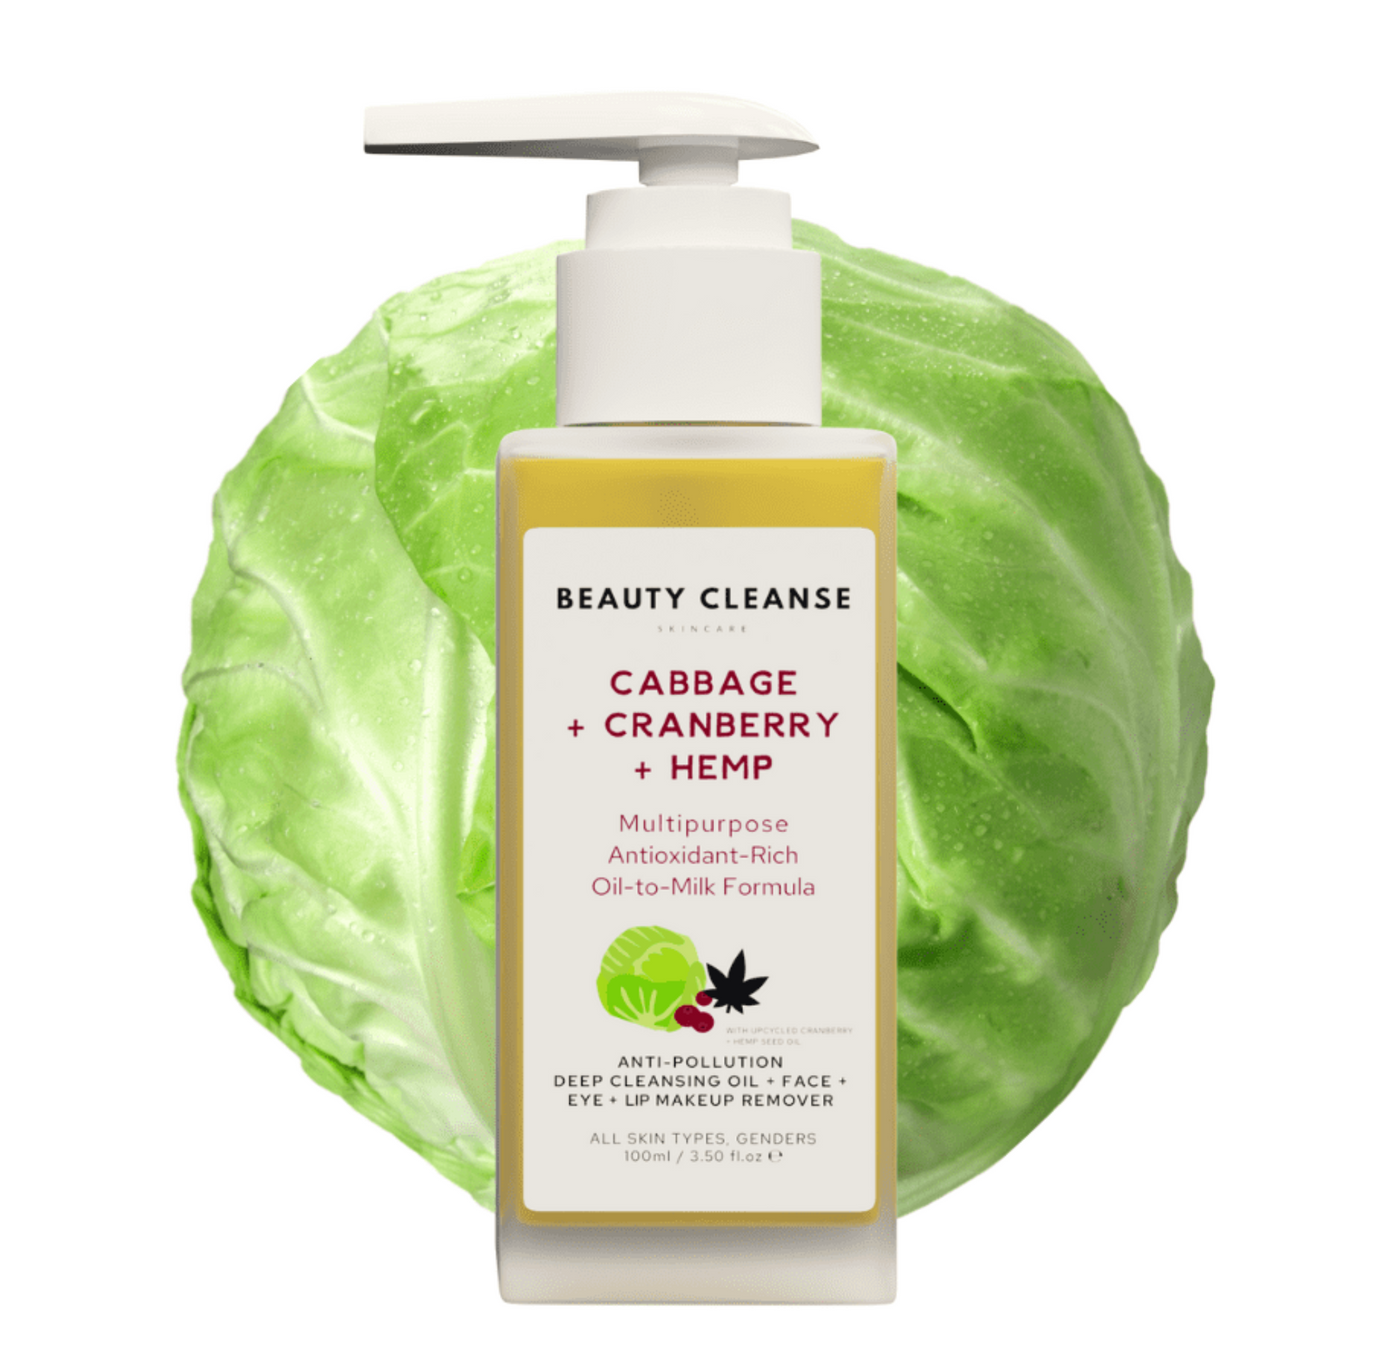 Cabbage Anti-Pollution Cleansing Oil & Makeup Remover | 3-IN-1